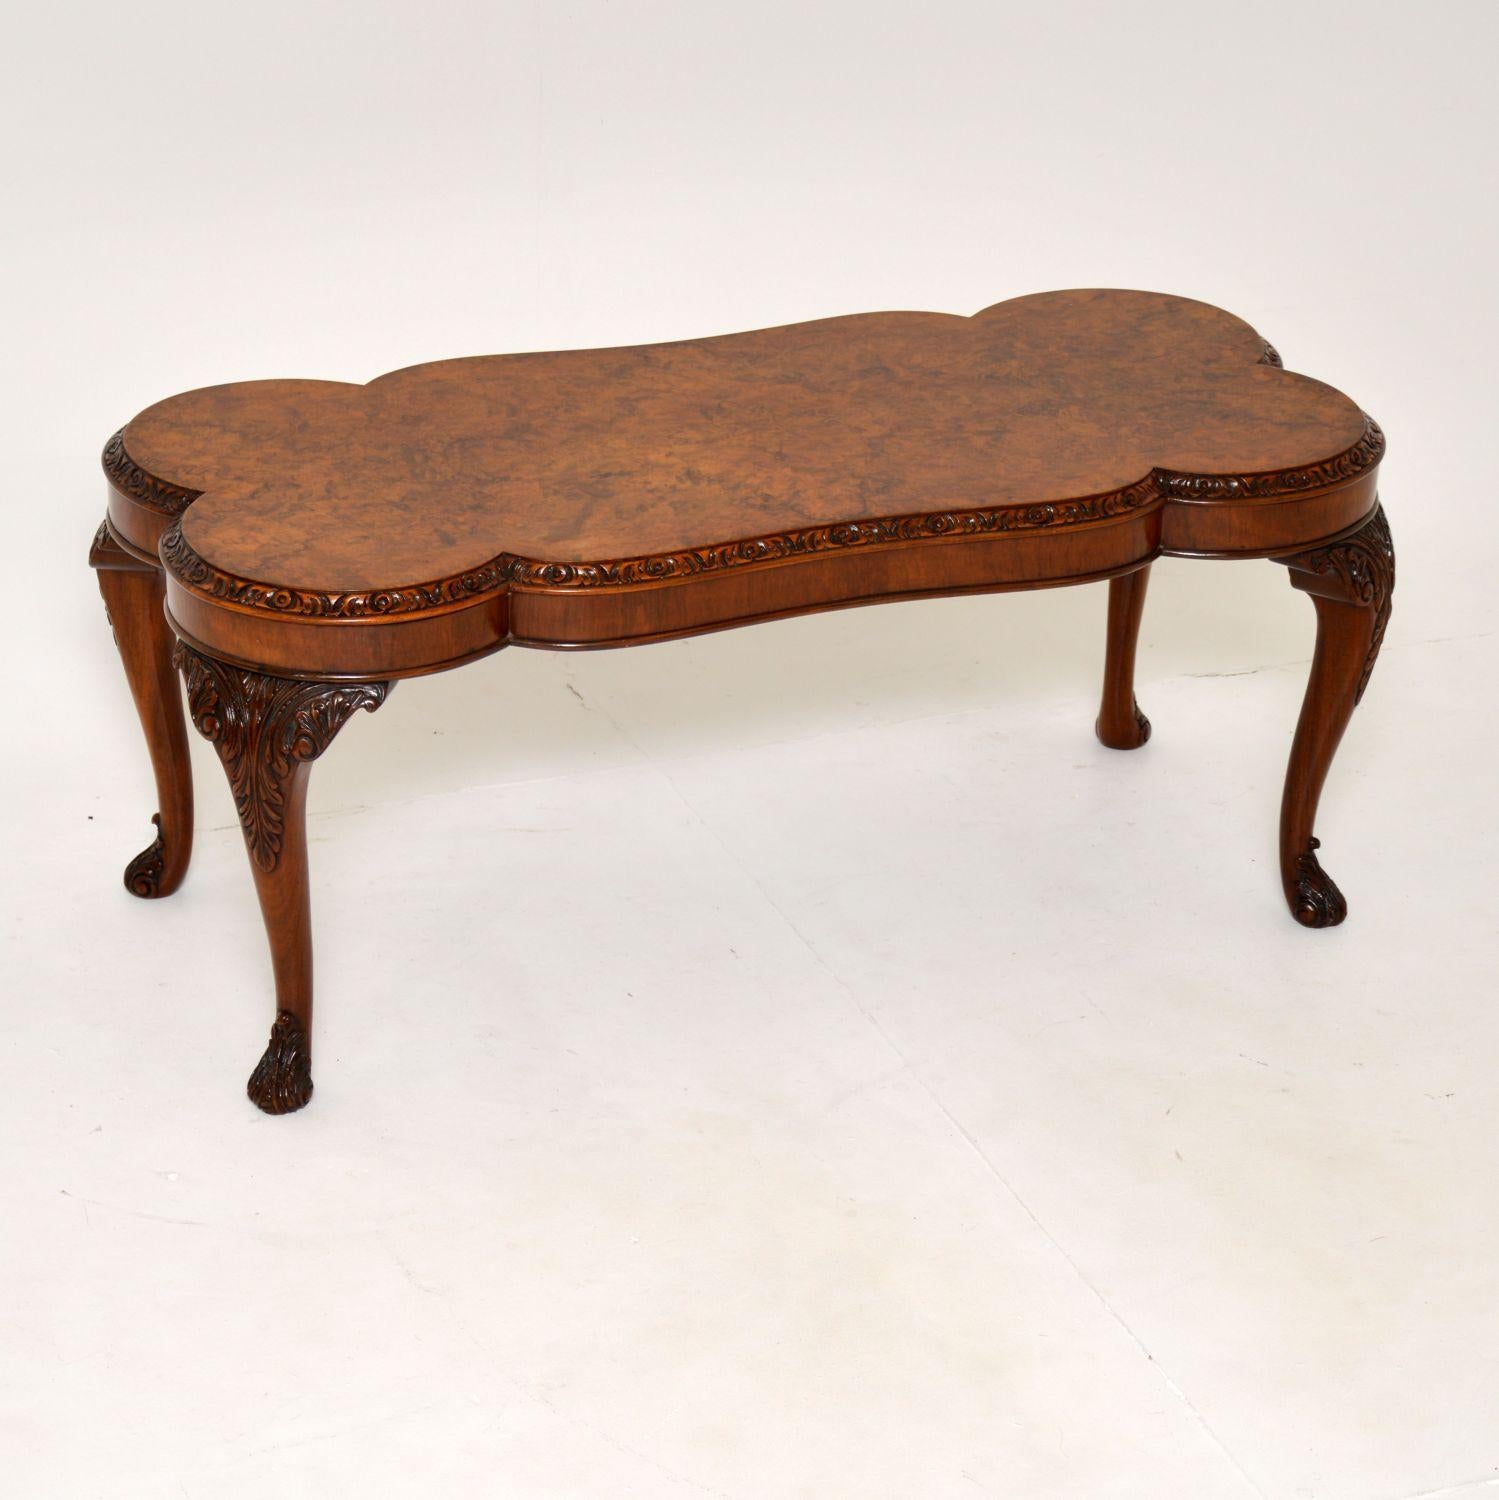 A gorgeous antique Queen Anne style coffee table in burr walnut, made in England & dating from the 1930’s period.

The quality is absolutely superb, with a stunning shaped top and amazing carving to the edges and legs. It is a great size and is